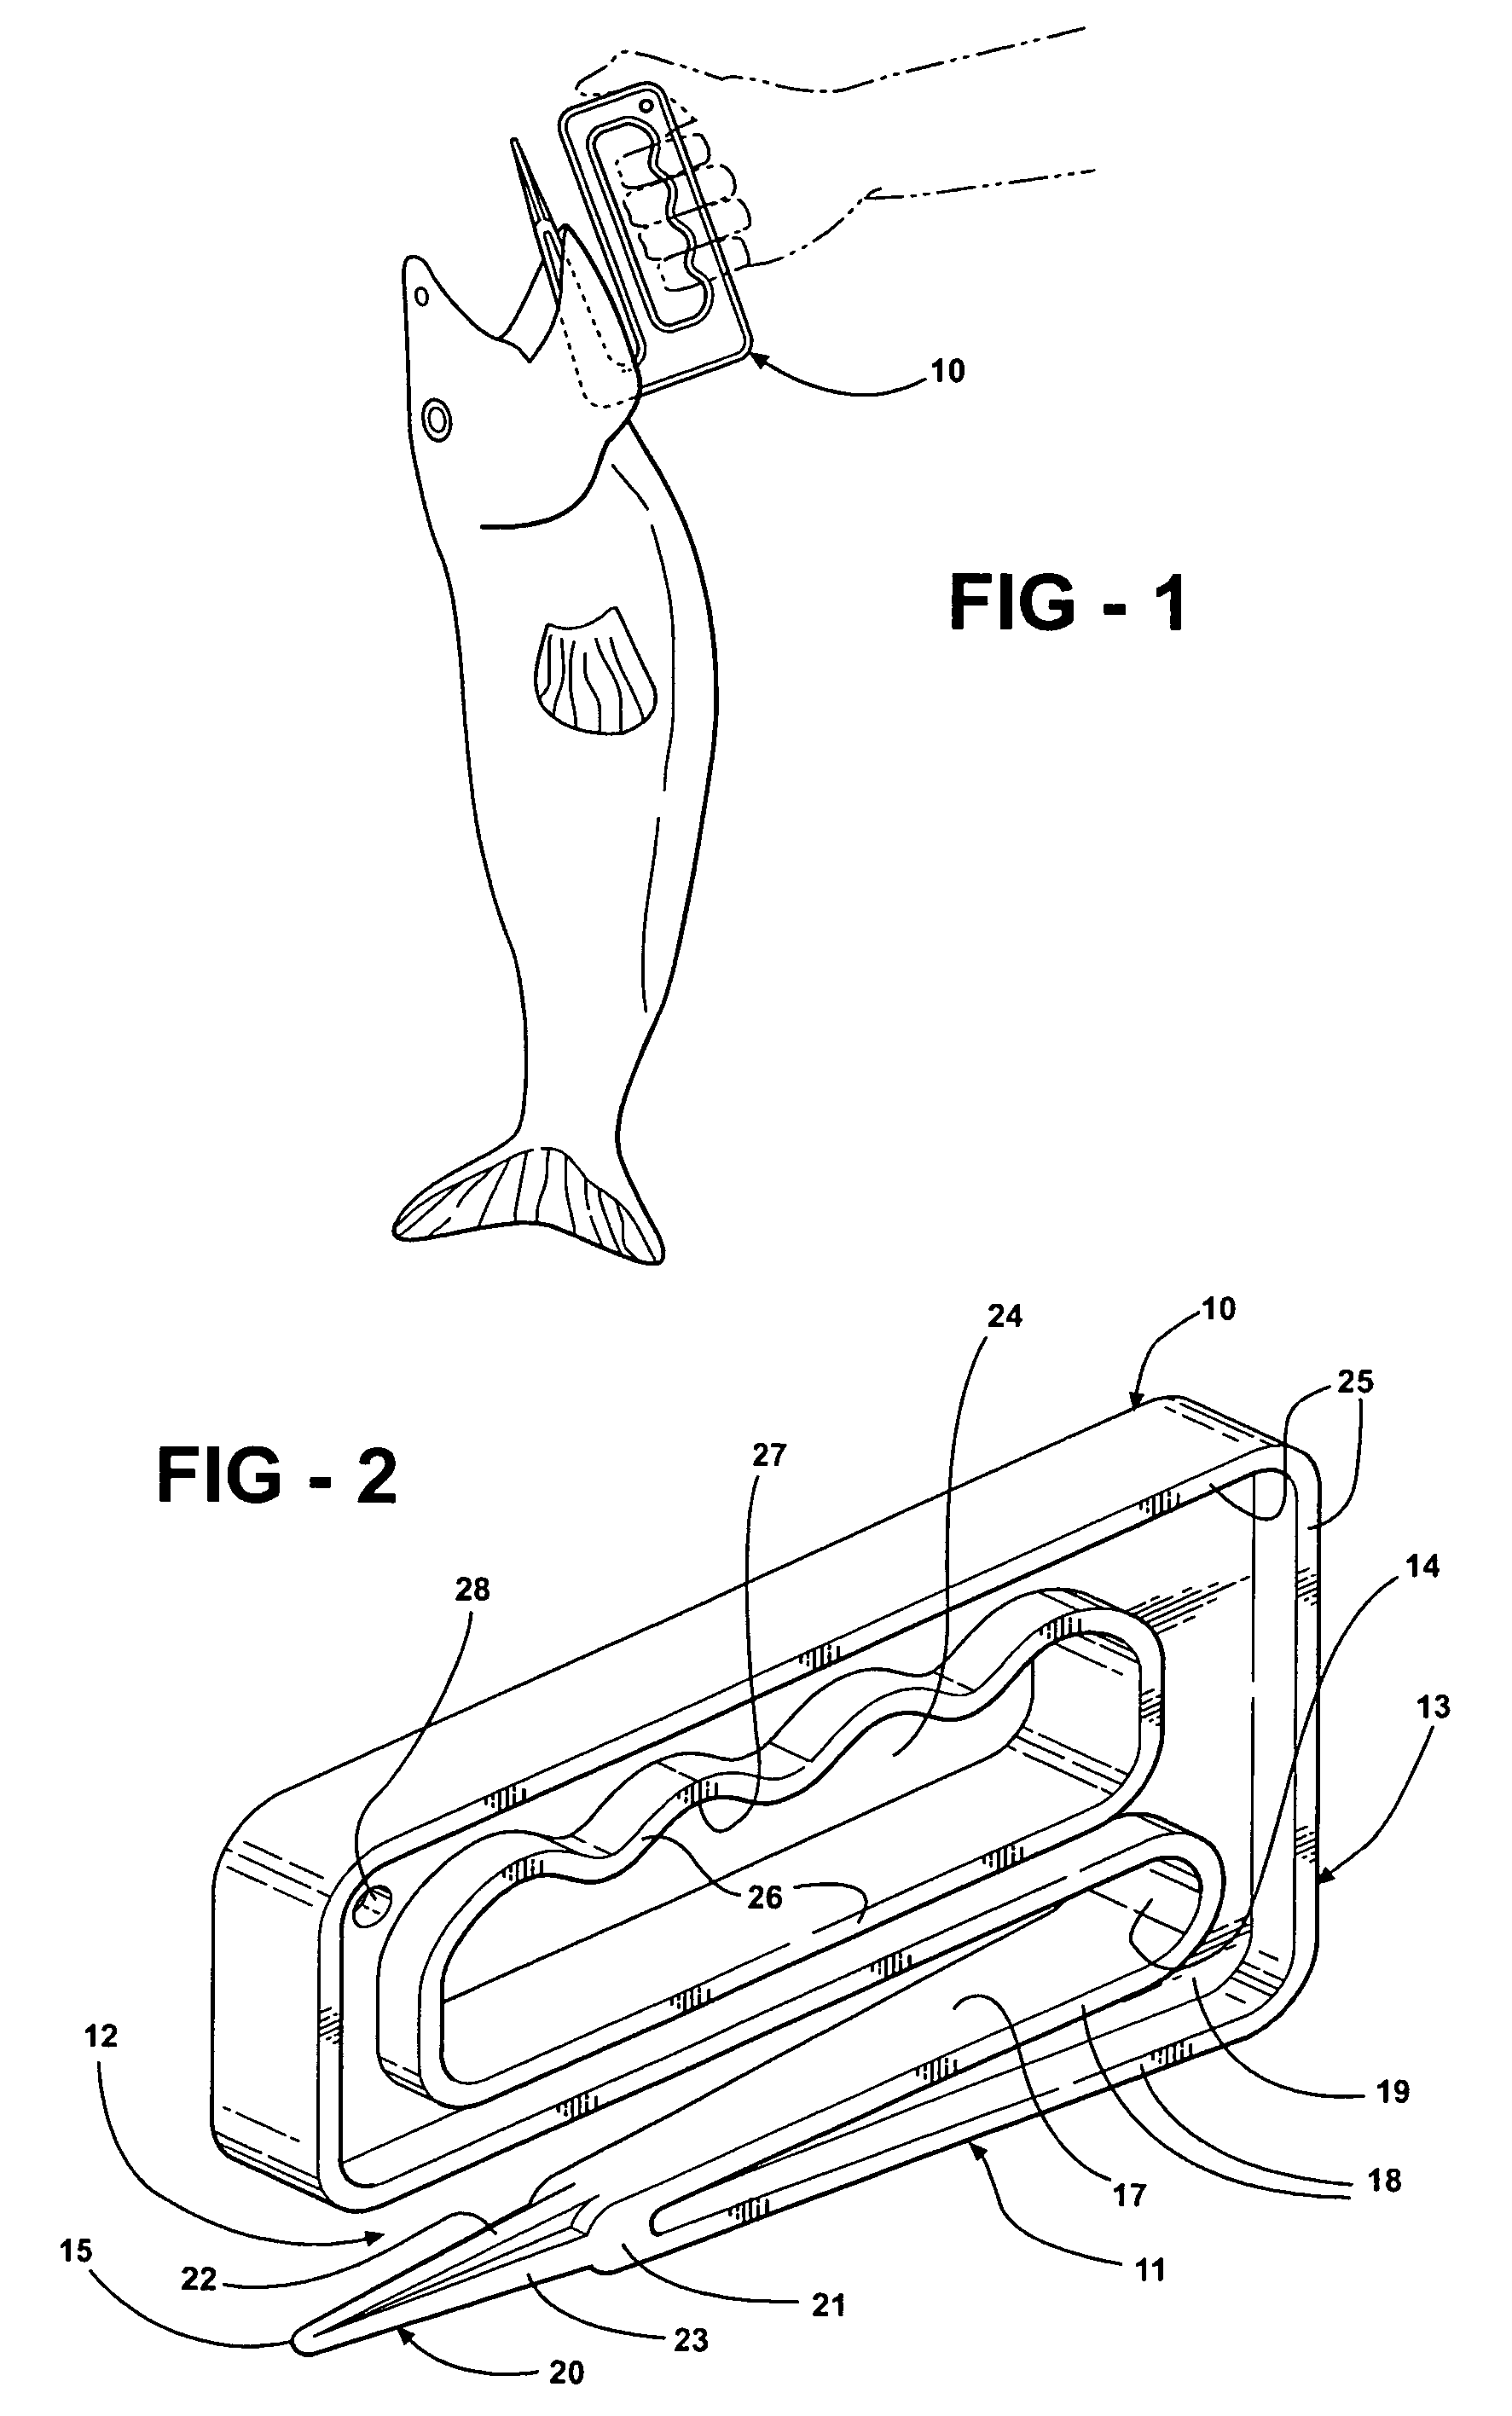 Device for handling fish